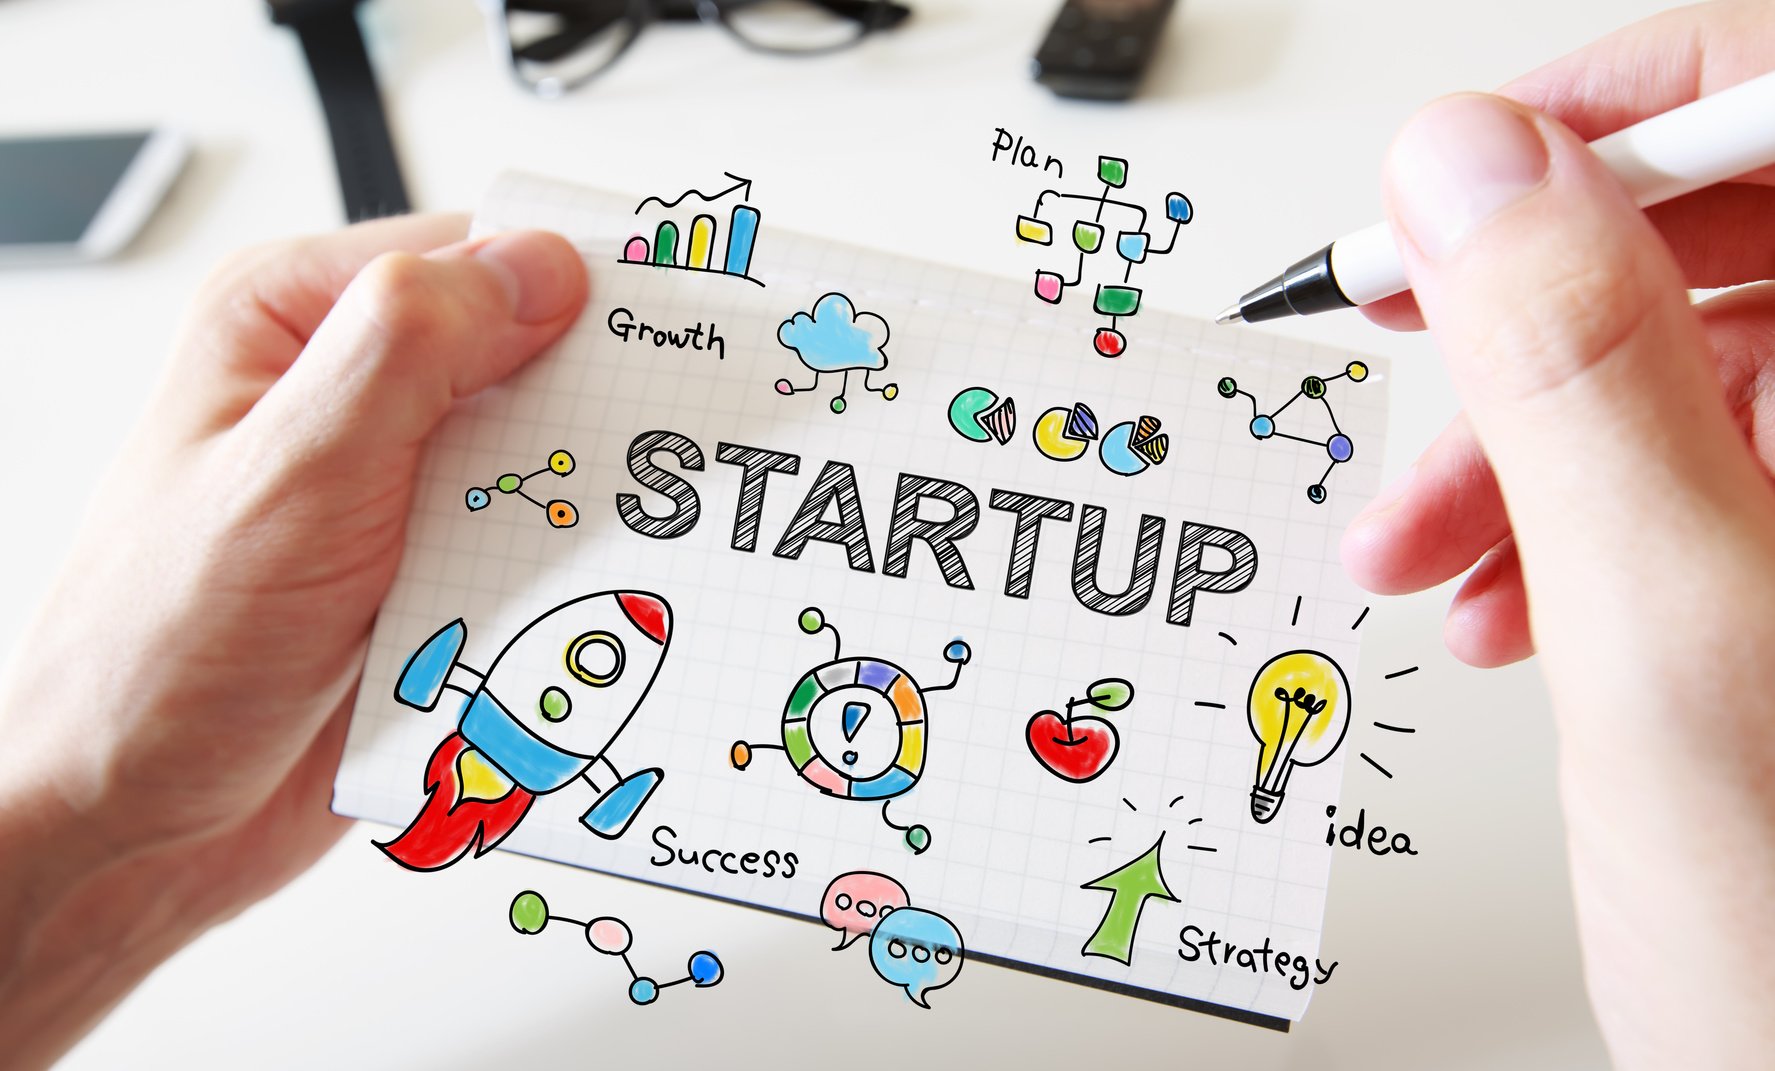 Four essential small business tips for startups - DigiGyan